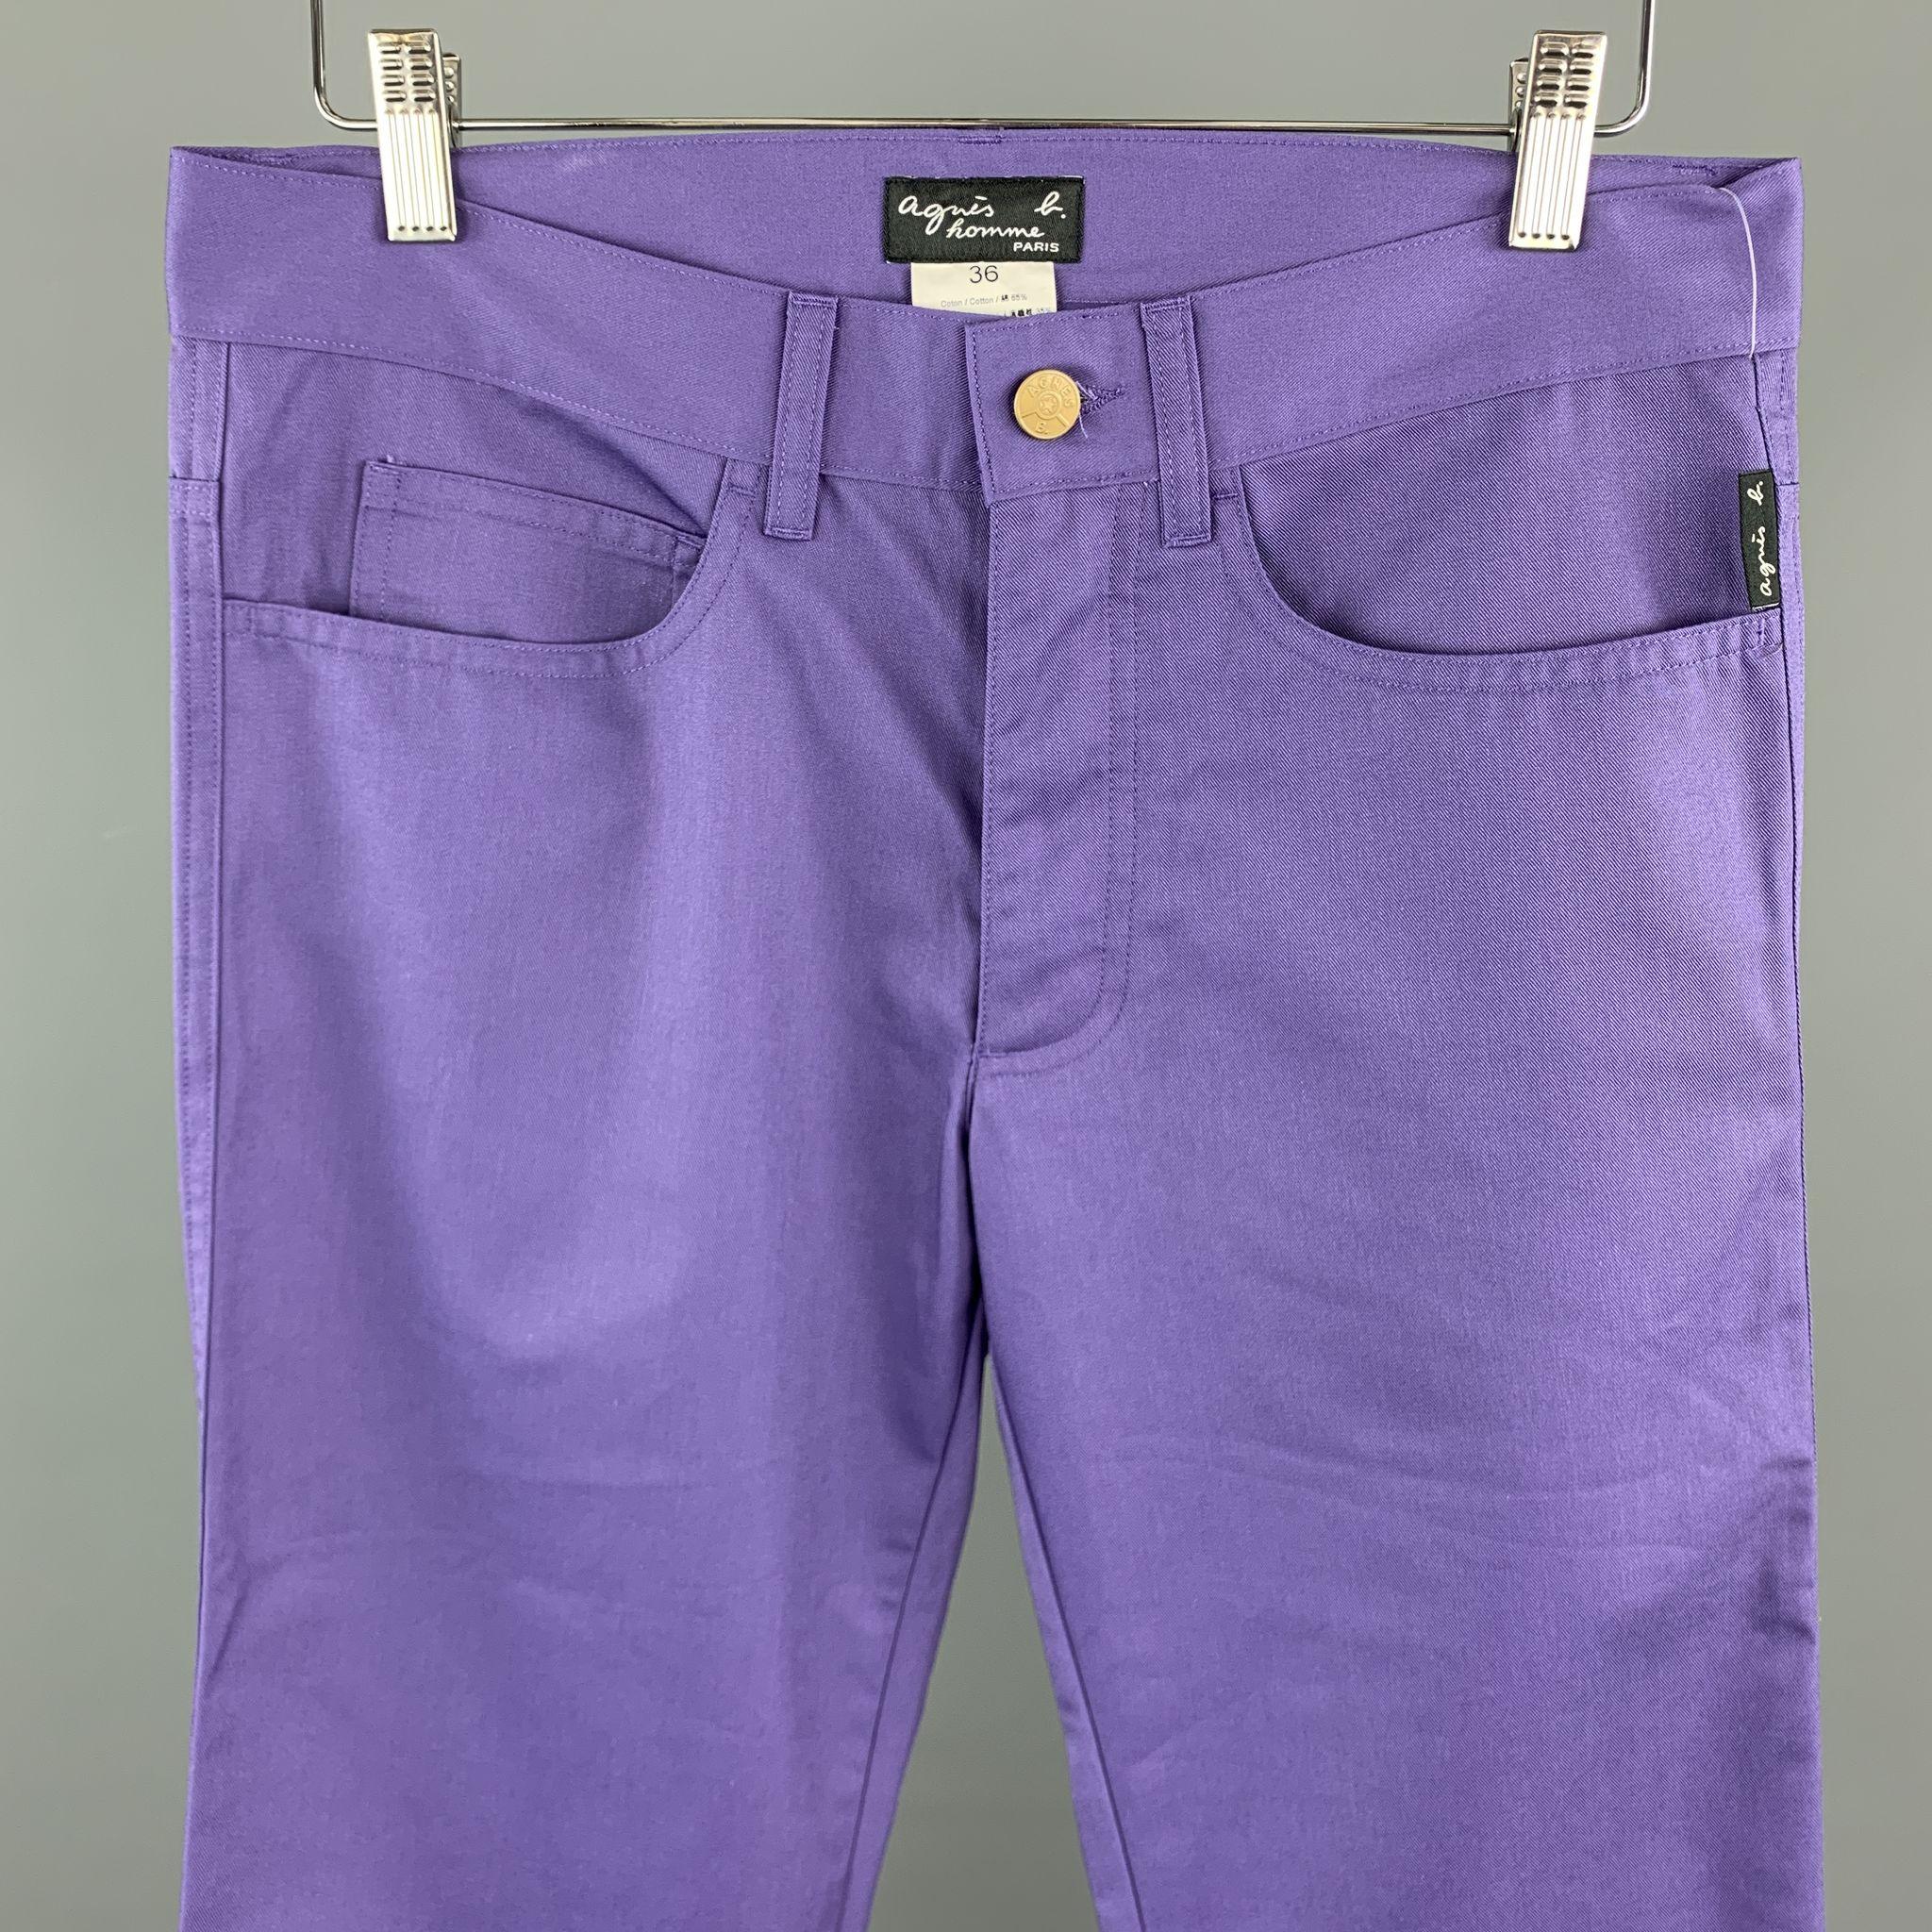 AGNES B. Casual Pants comes in a purple cotton blend featuring a jean cut style and a button up closure. 

Brand New.
Marked: 36

Measurements:

Waist: 30 in. 
Rise: 8 in. 
Inseam: 34 in. 